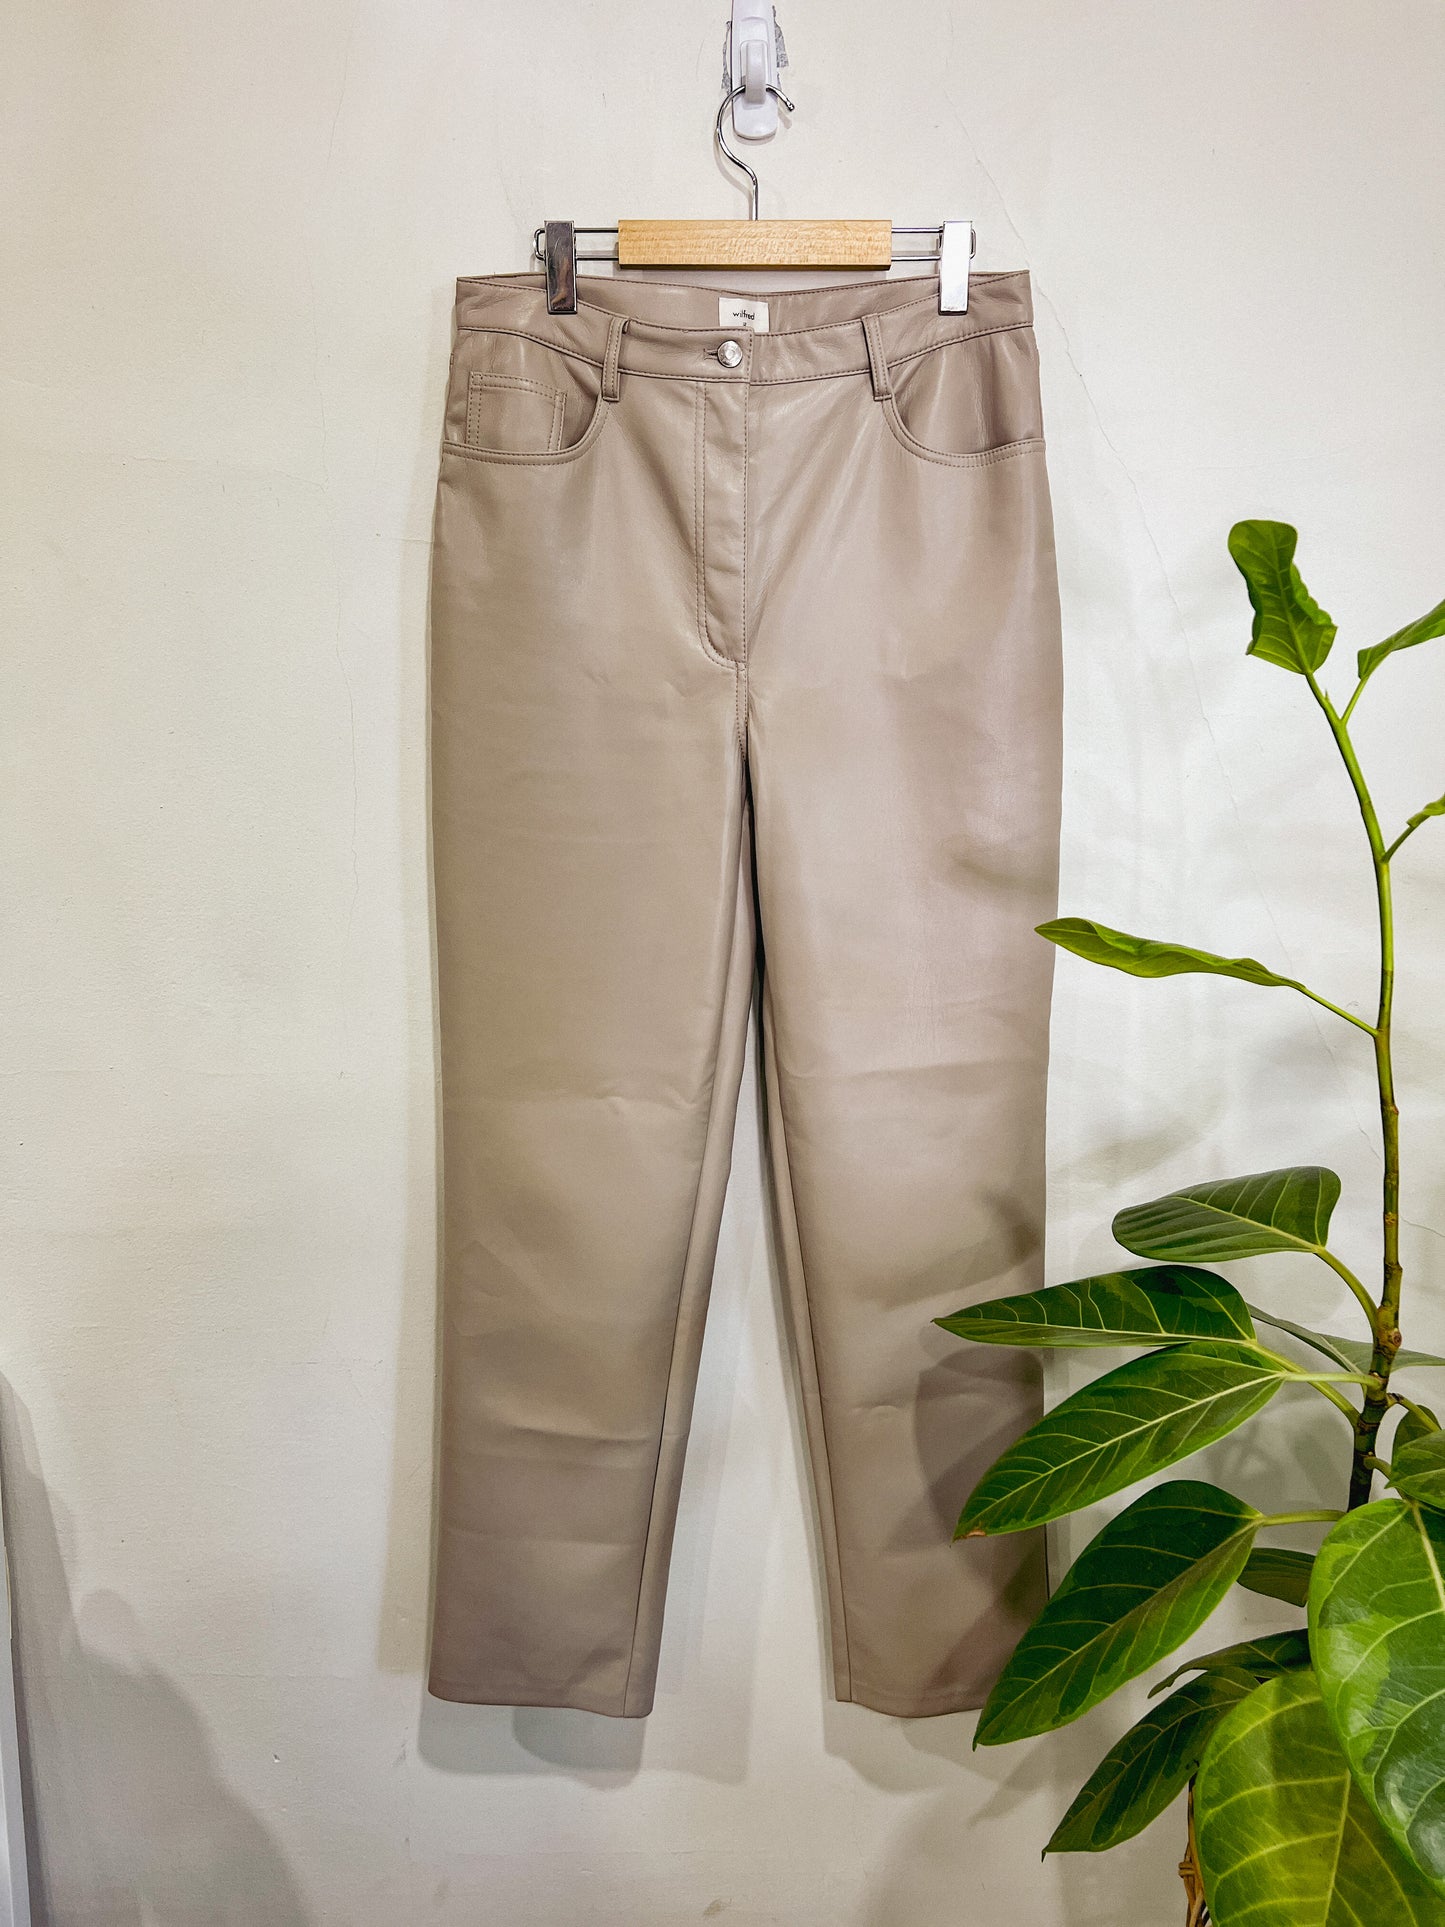 Wilfred Light Grey Faux Leather "Melina Pant" (Size 12)